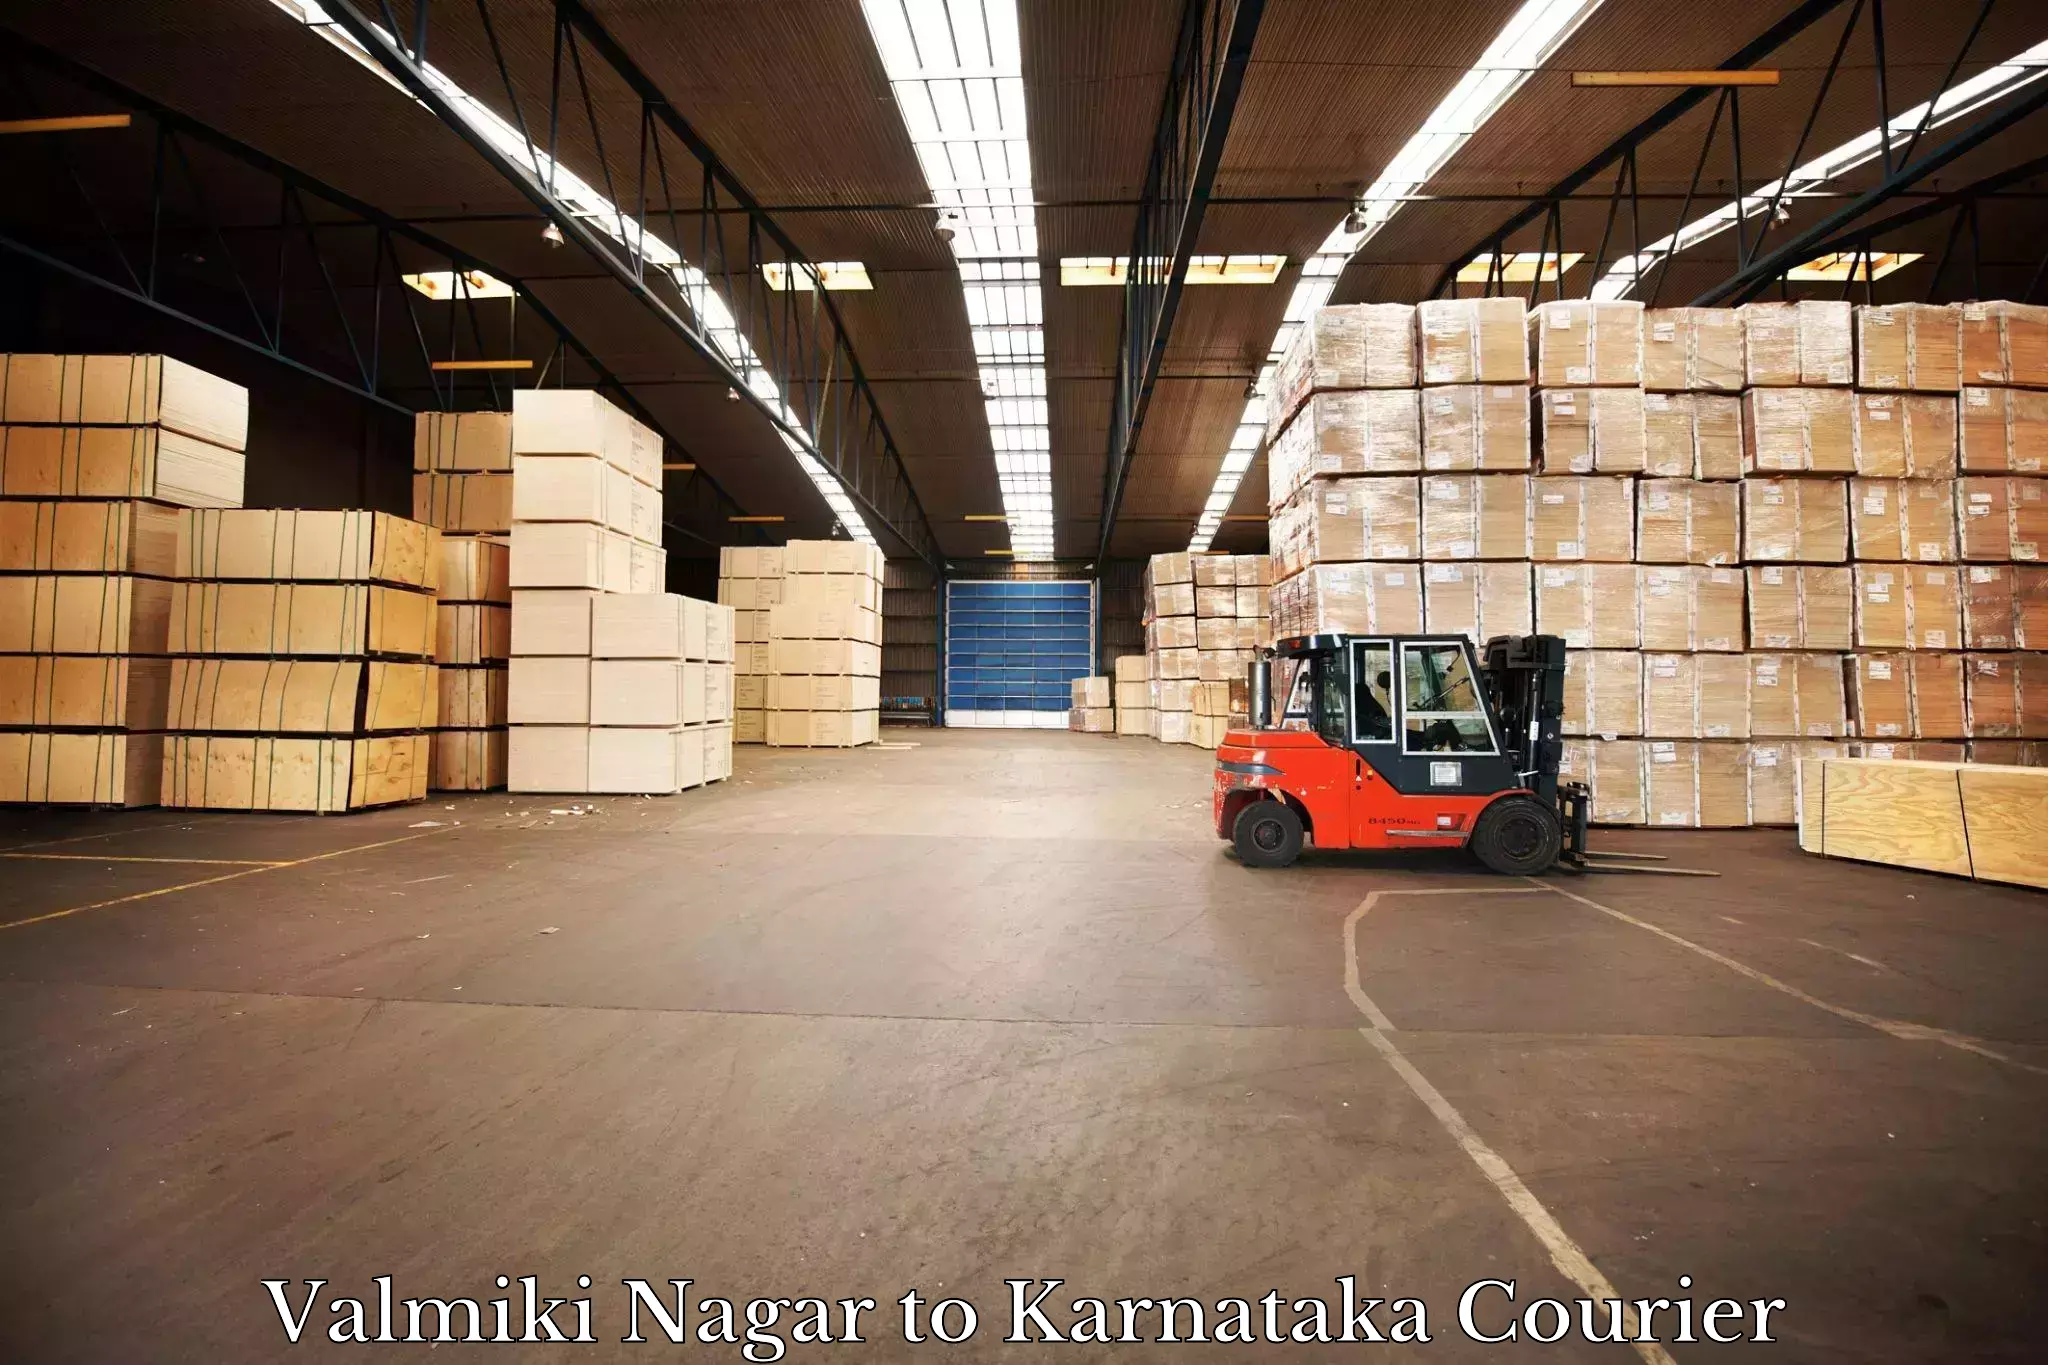 Reliable courier service in Valmiki Nagar to Yellare